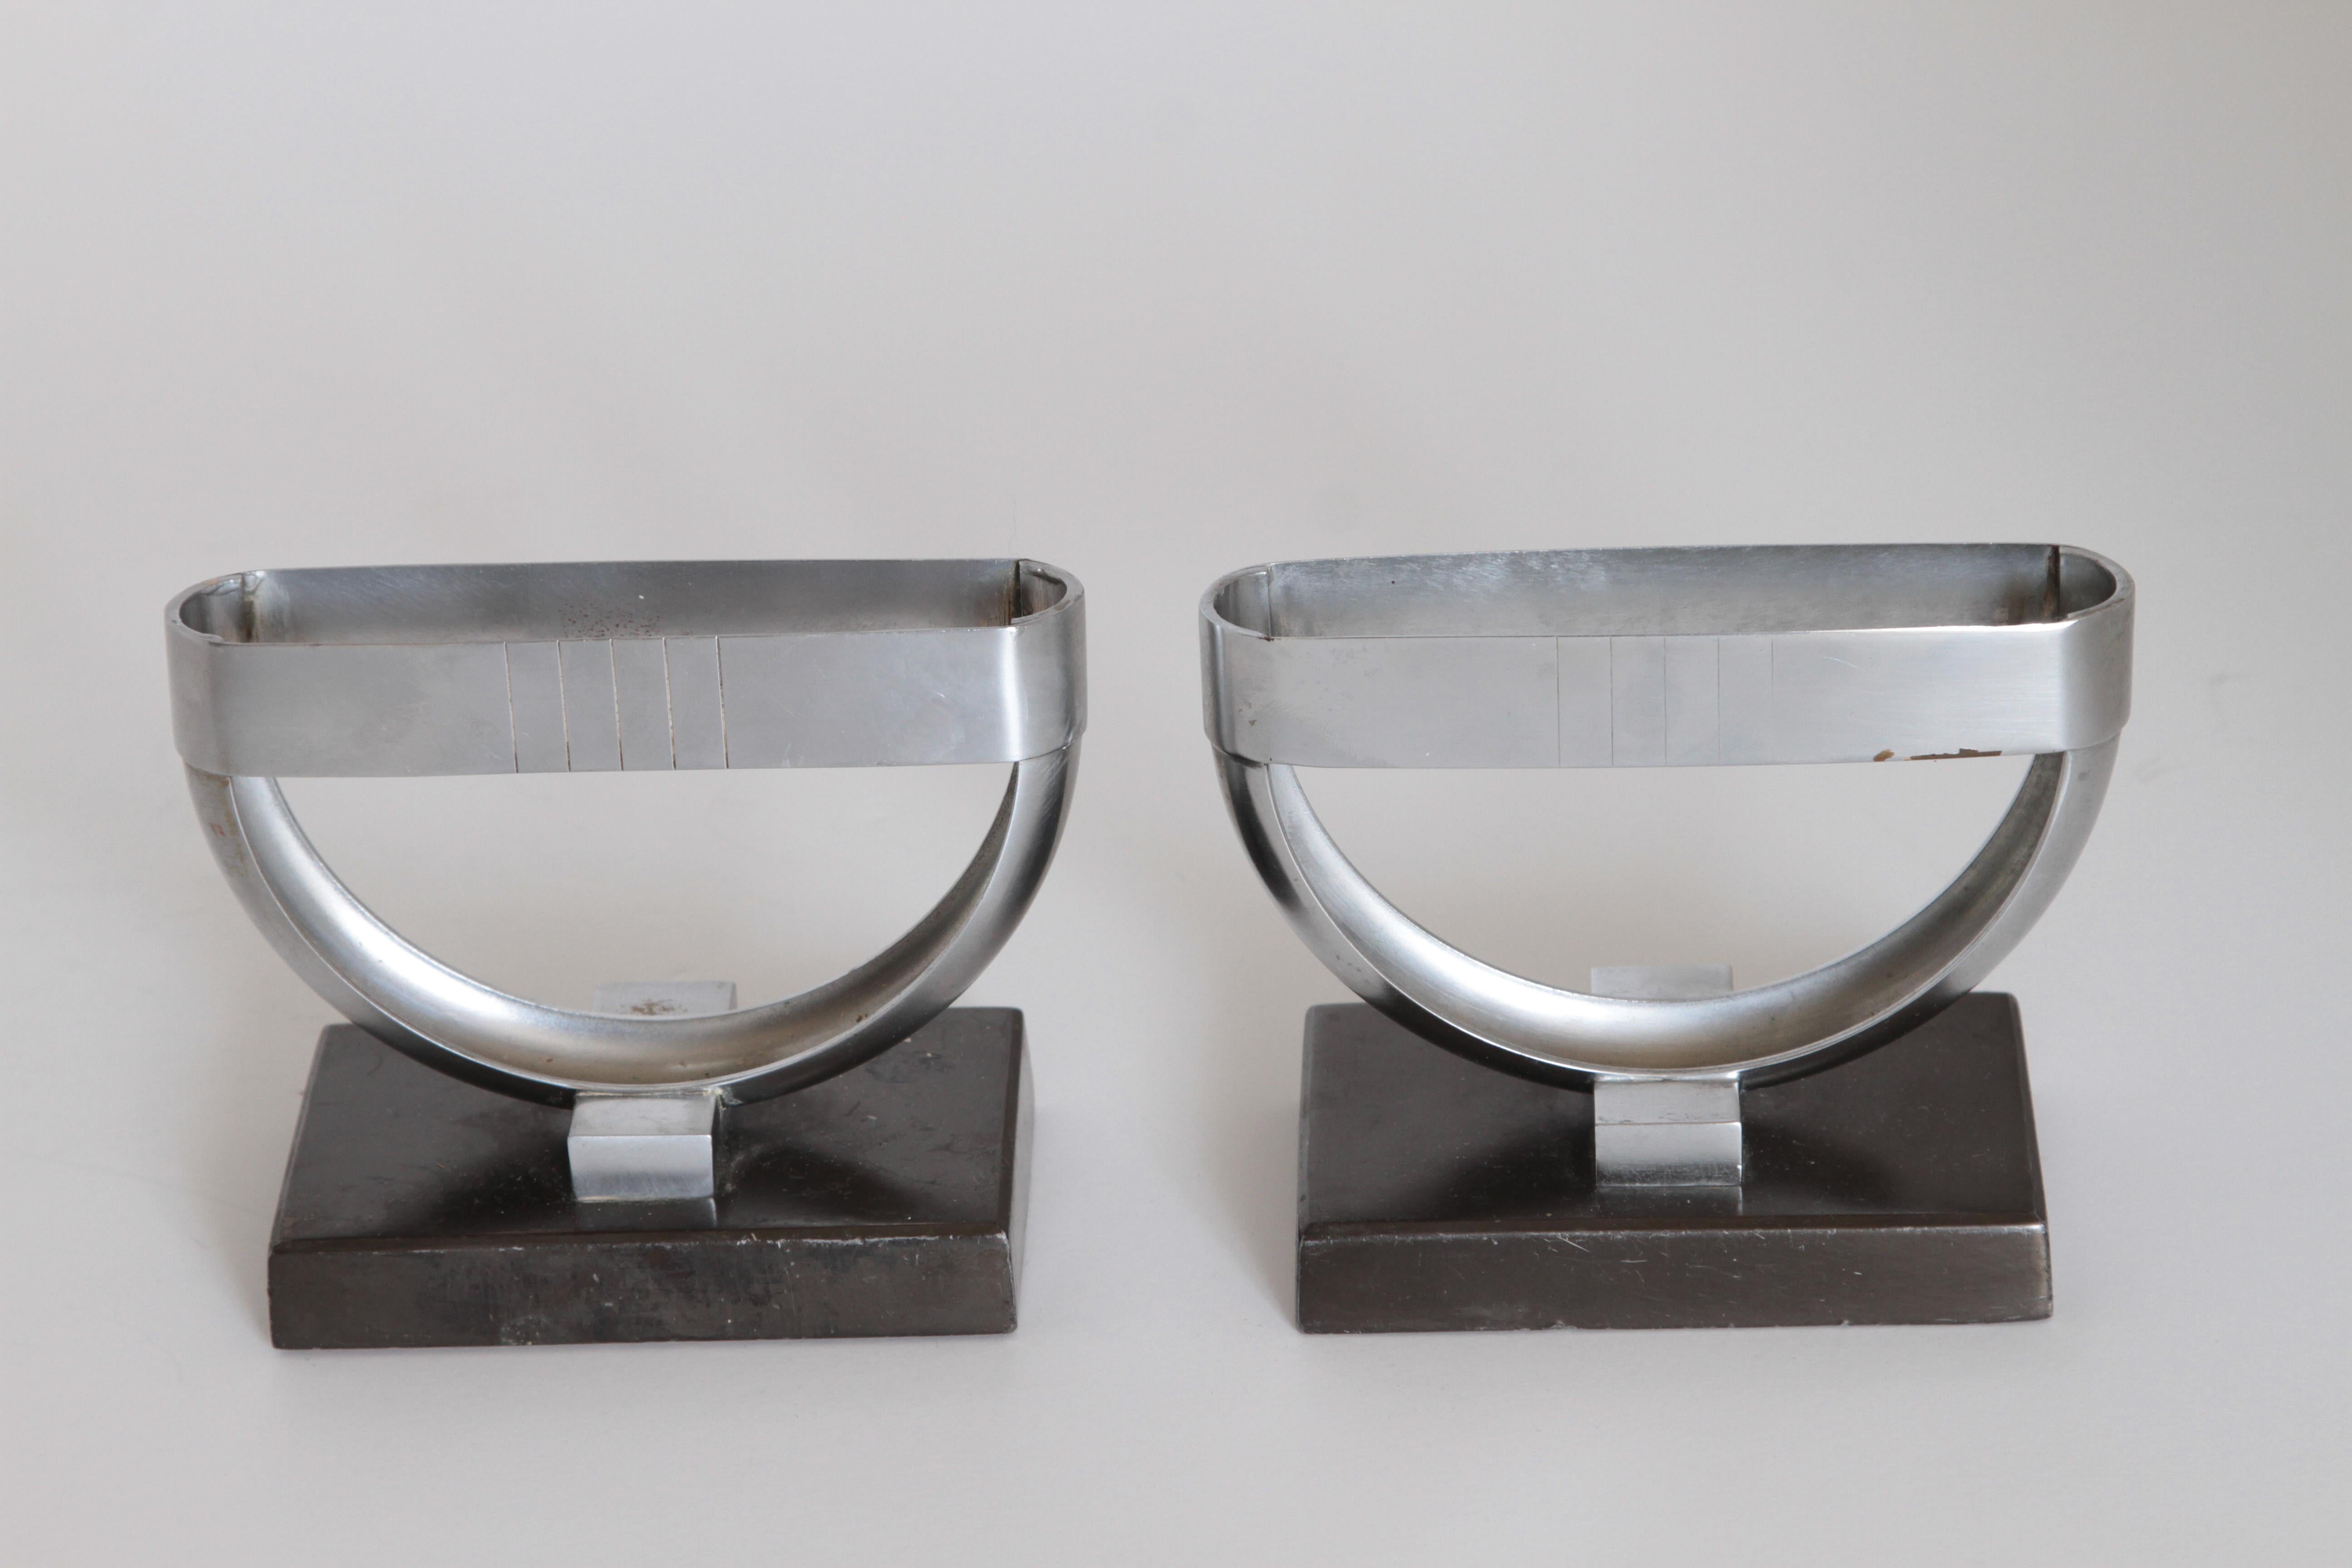 Machine Age Art Deco Norman Bel Geddes Pair Revere Crescent Candlestick Holders

Designed for 